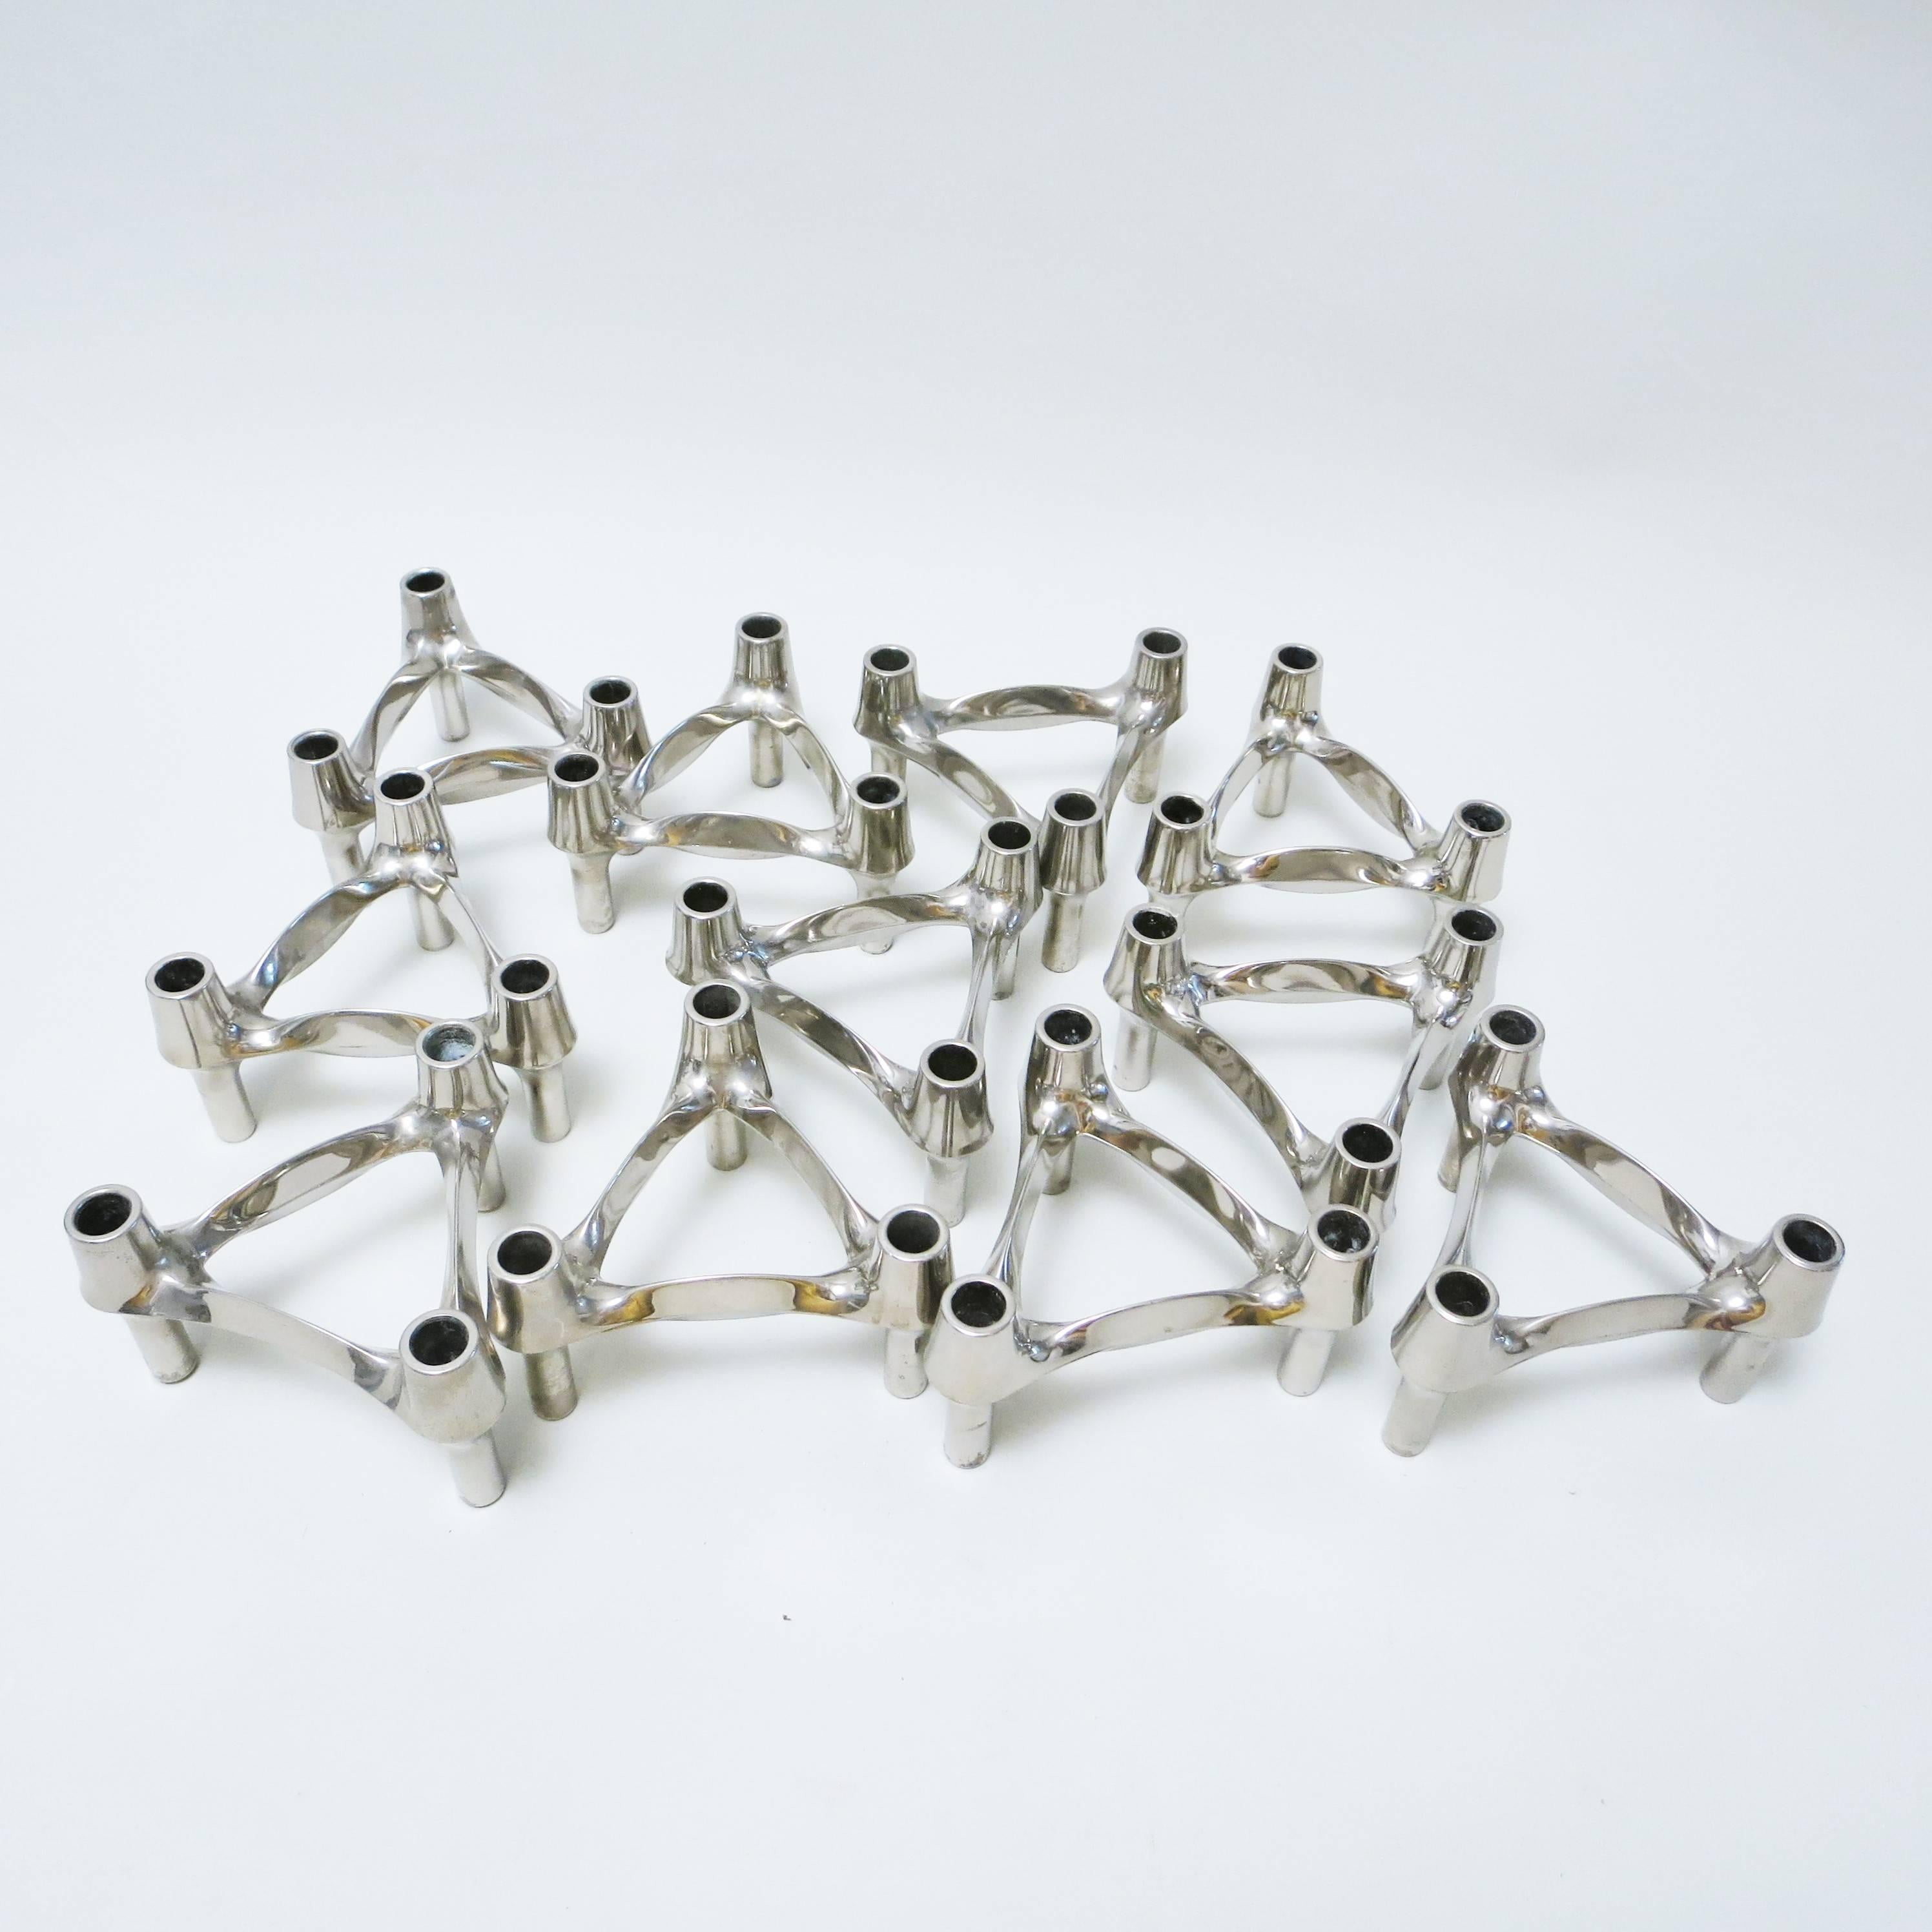 Original 1970s set of 11 Candleholder by Caesare Stoffi and Fritz Nagel for BMF, Nagel, Germany. 
A modular design, stackable and blendable candleholder to build sculptural objects in several kind of ways and dimensions. 
This item is in a very